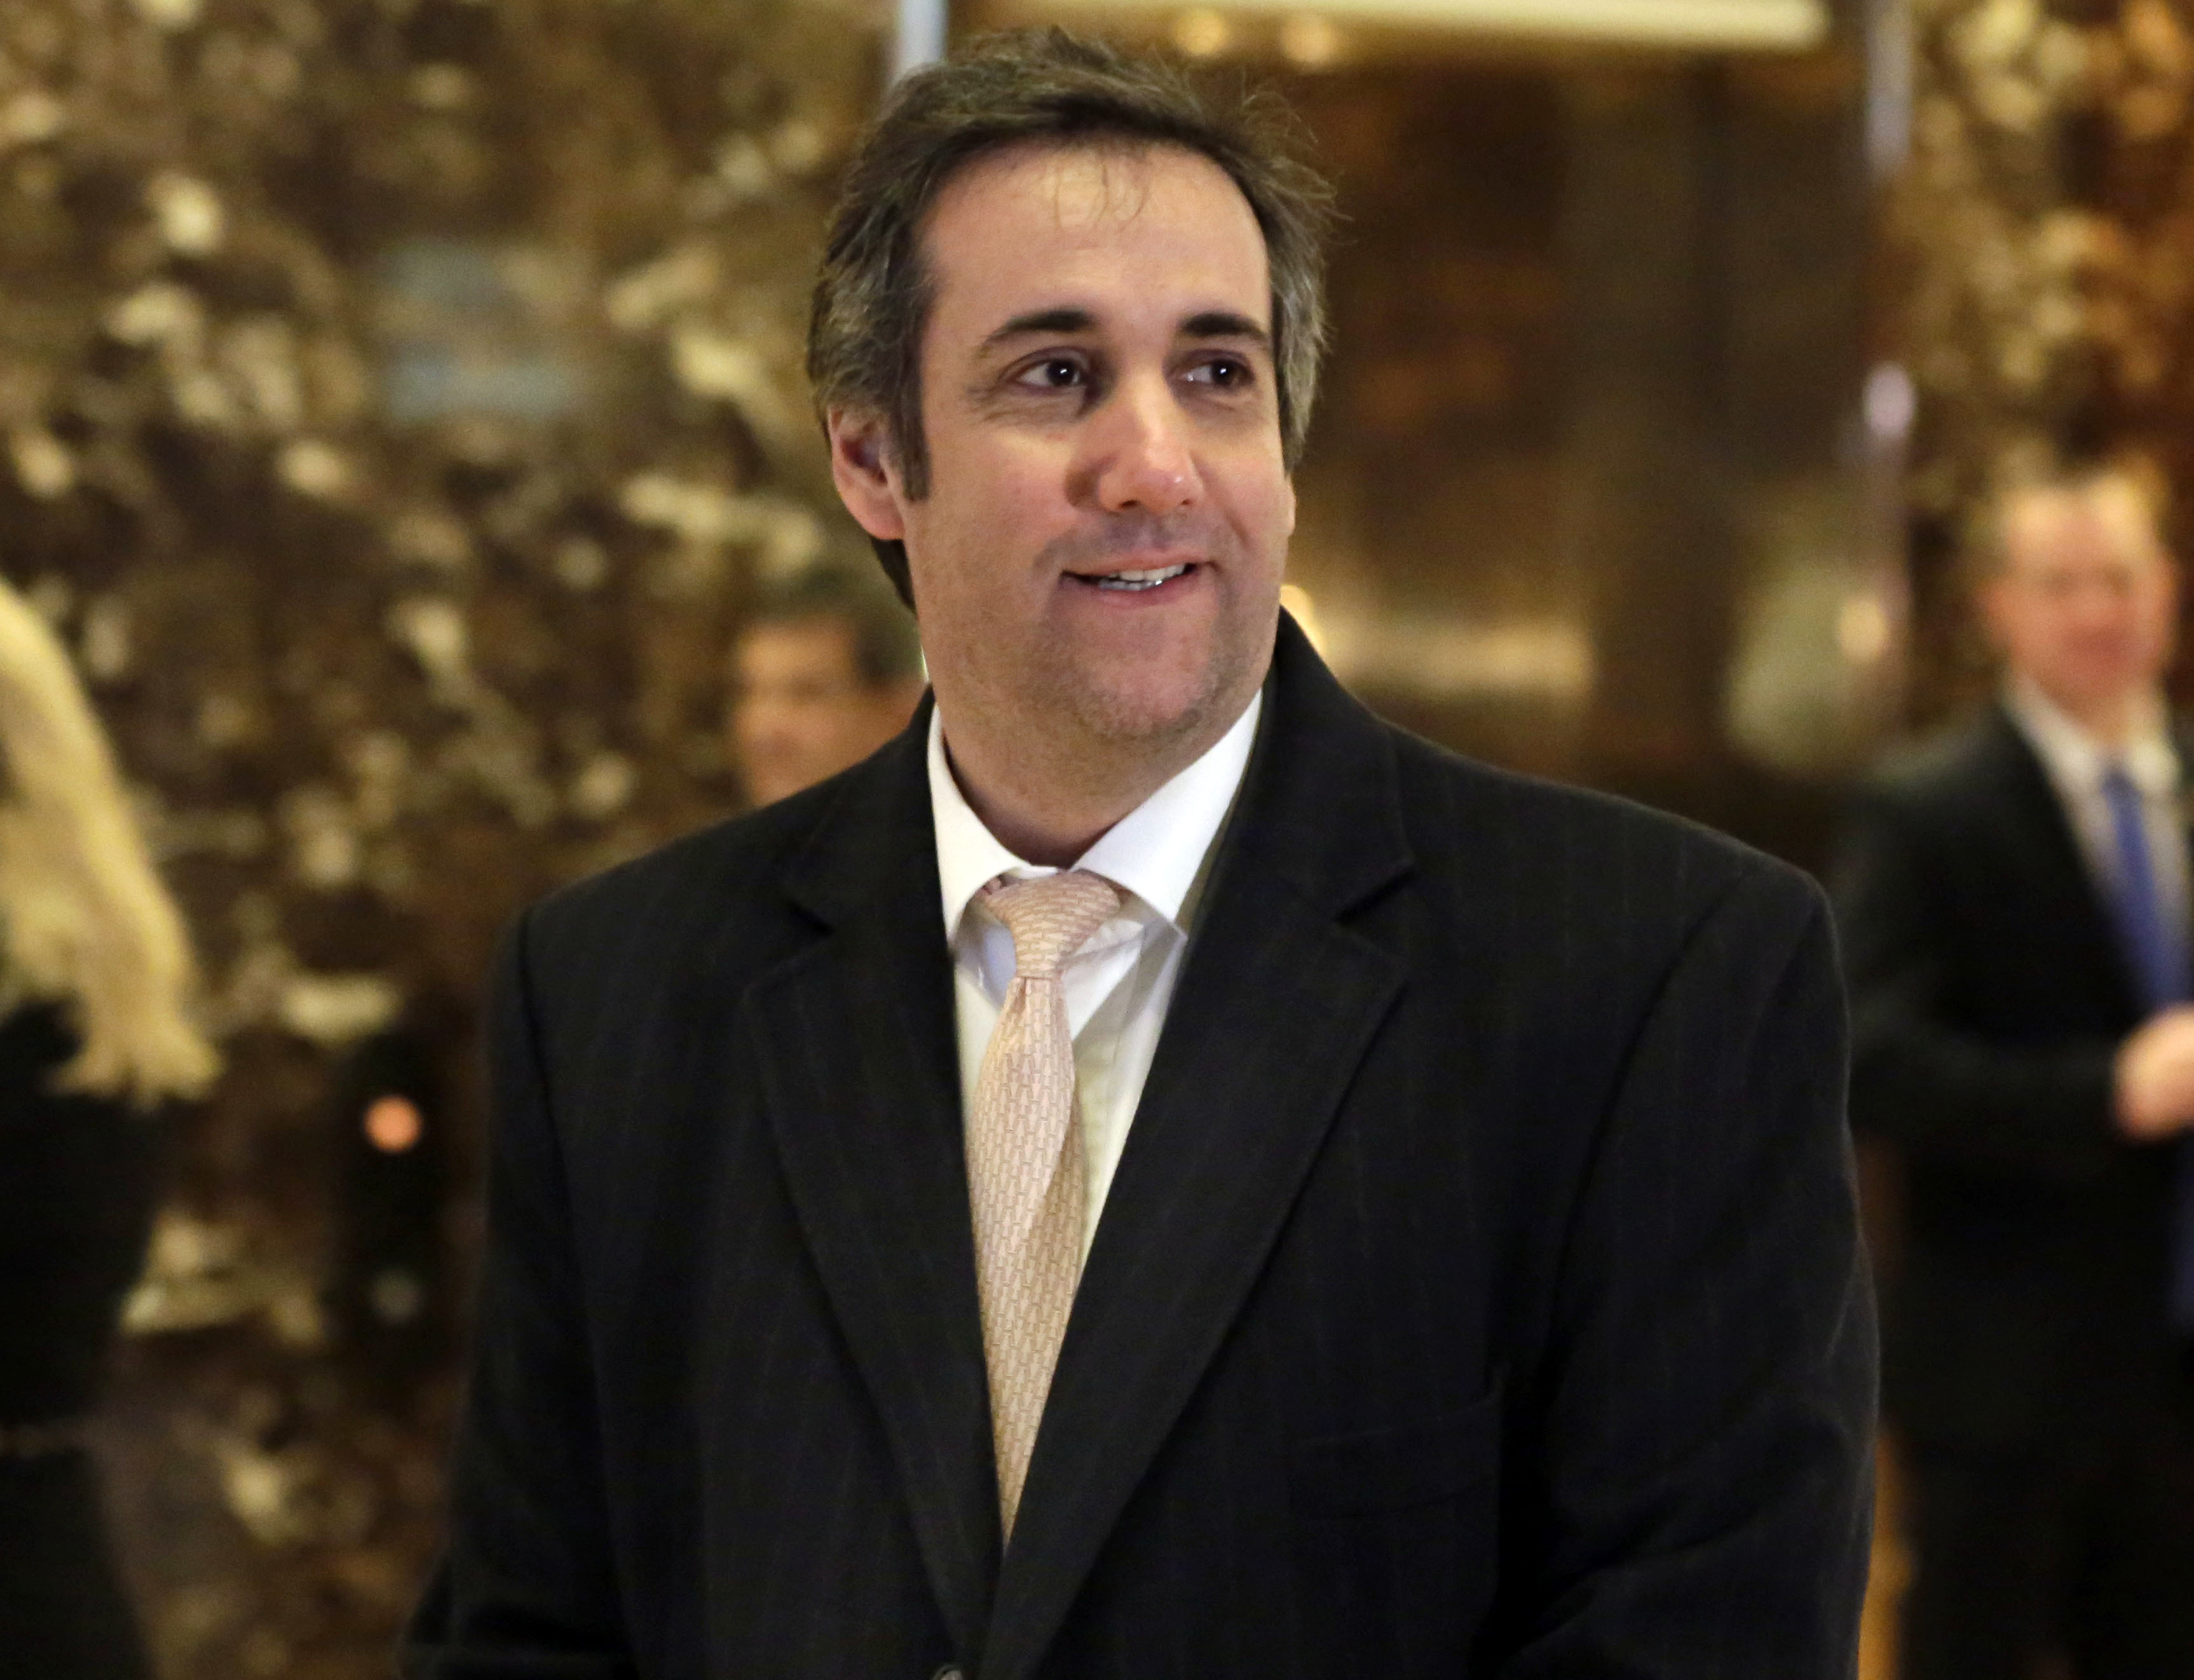 Michael Cohen, an attorney for Donald Trump, arrives in Trump Tower in New York on Dec. 16, 2016. (AP) (Richard Drew&mdash;AP)